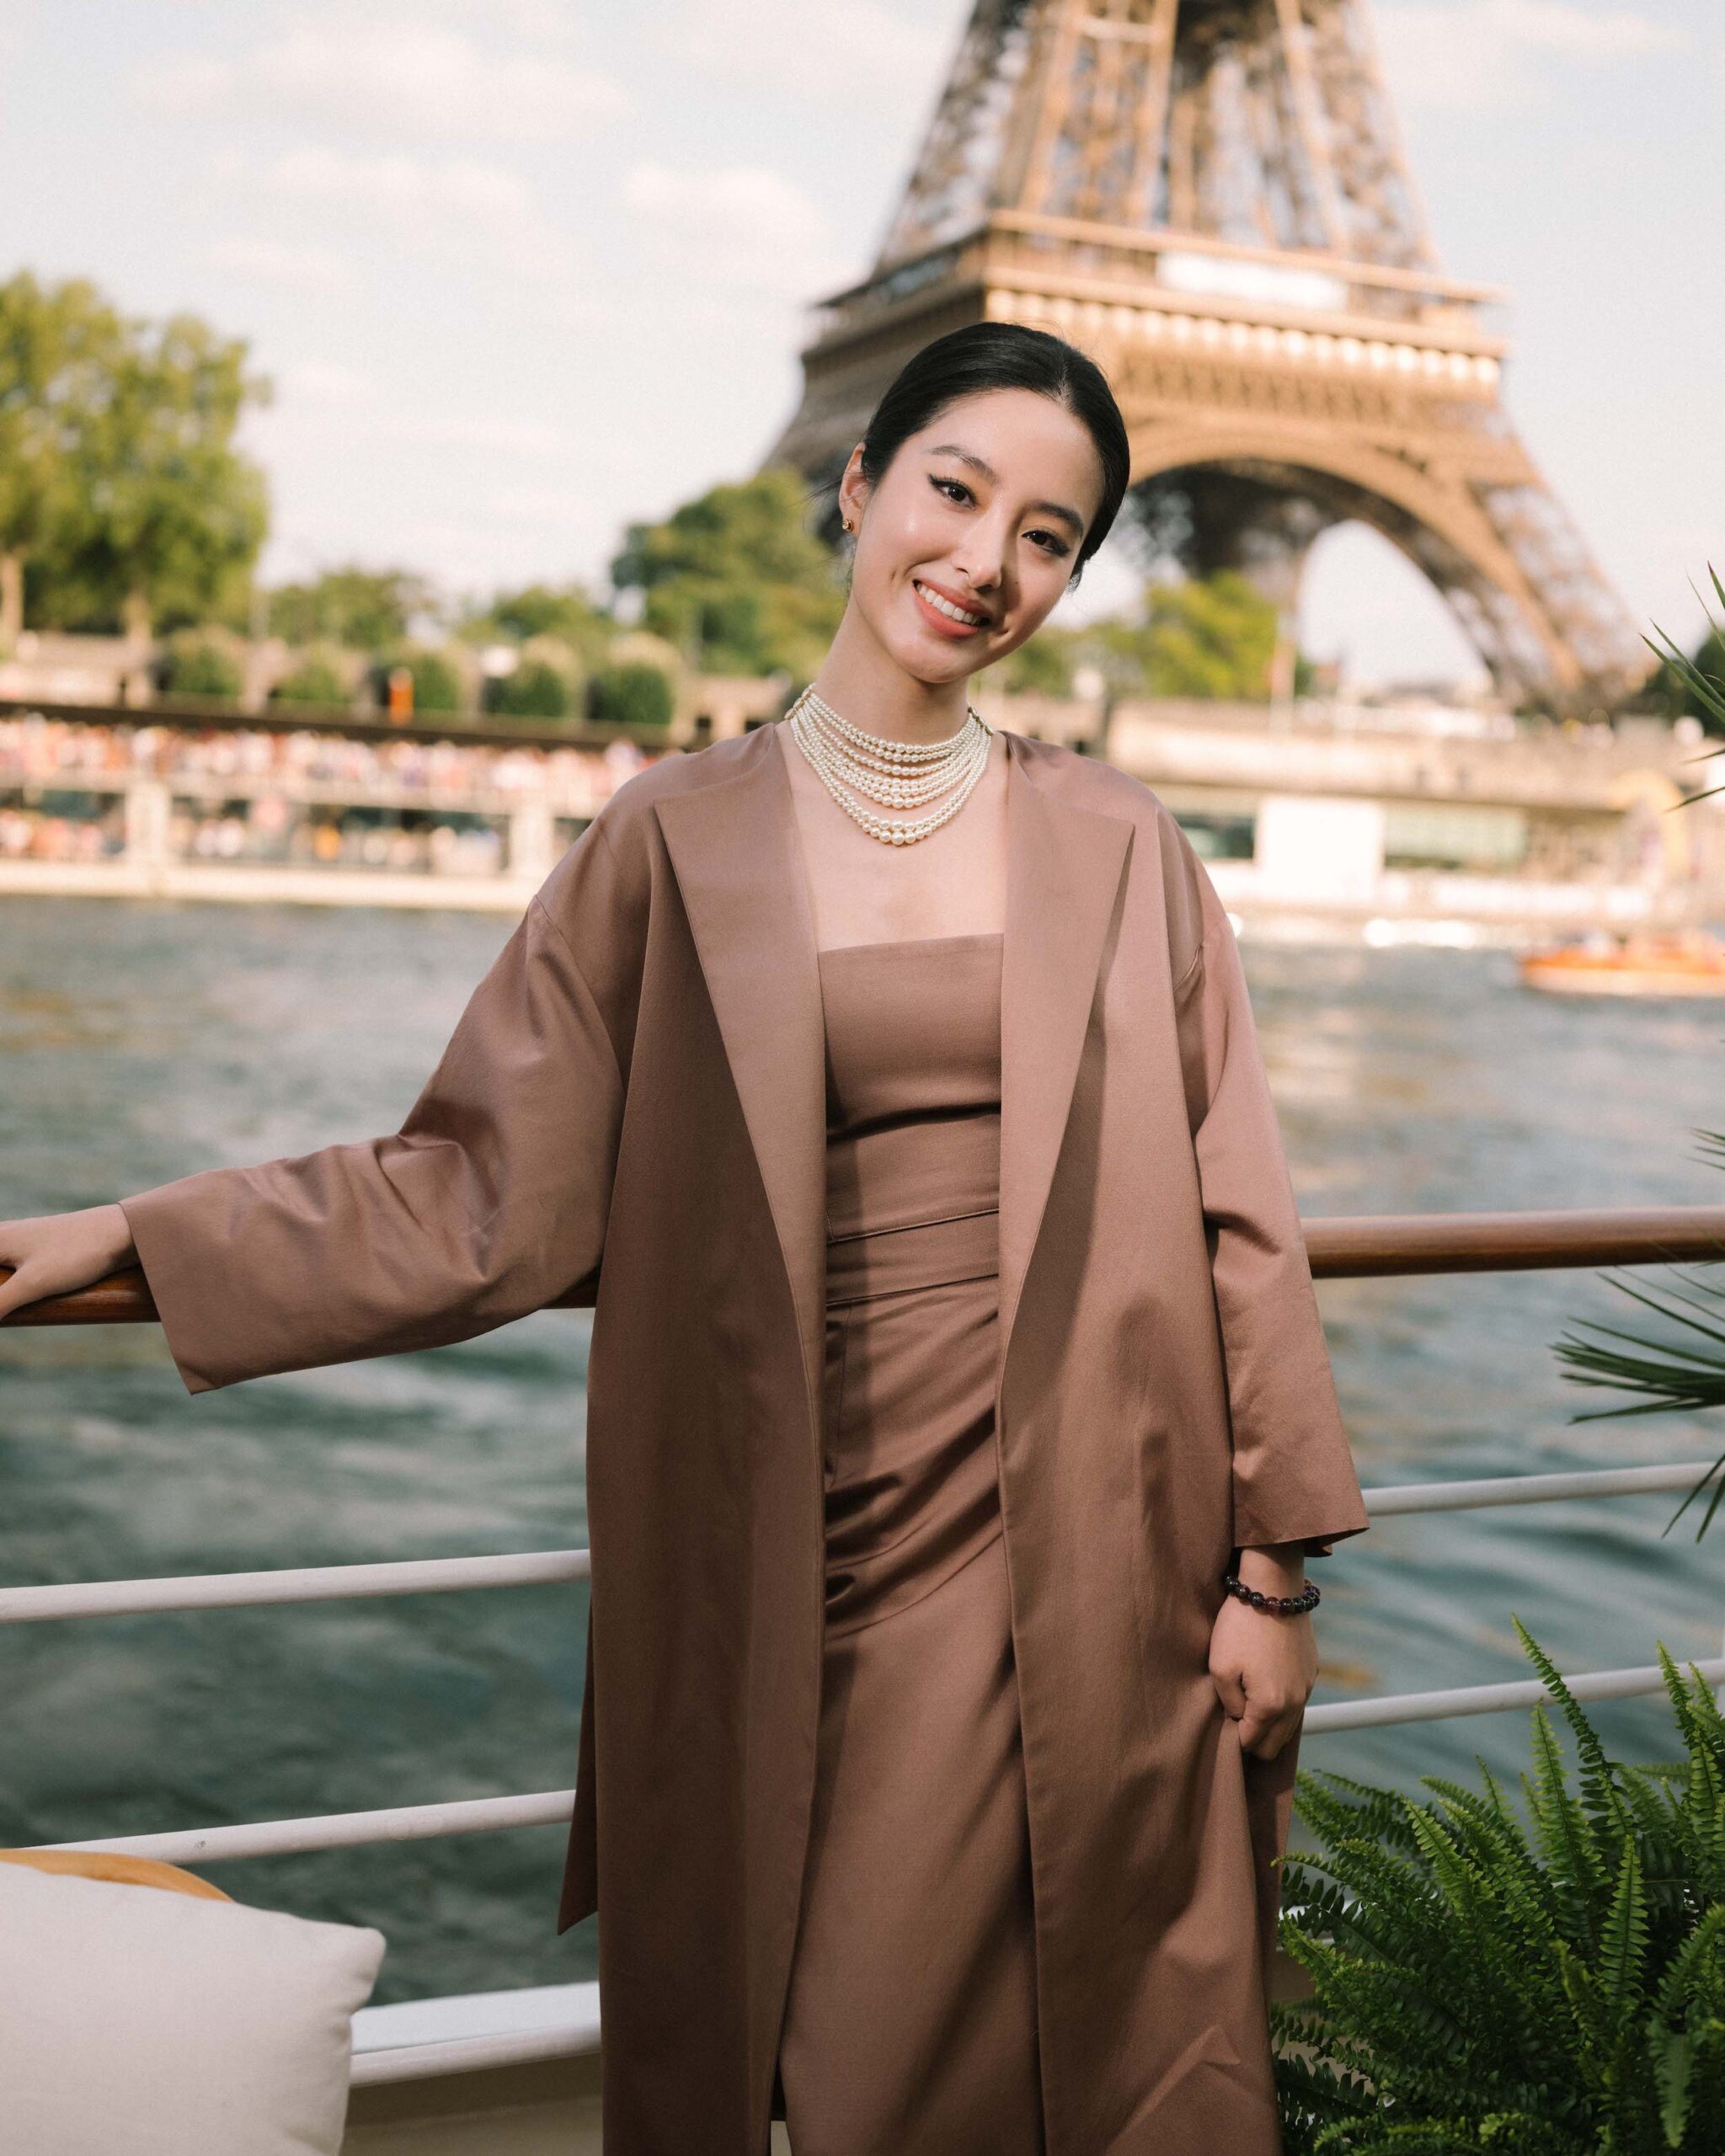 Ora Yang in Dior Pre Fall 2023 Ora Yang exuded feminine charm in an old rose satin coat, bustier top, and skirt from the Dior Pre Fall 2023 collection. She accessorized with a Dior necklace.